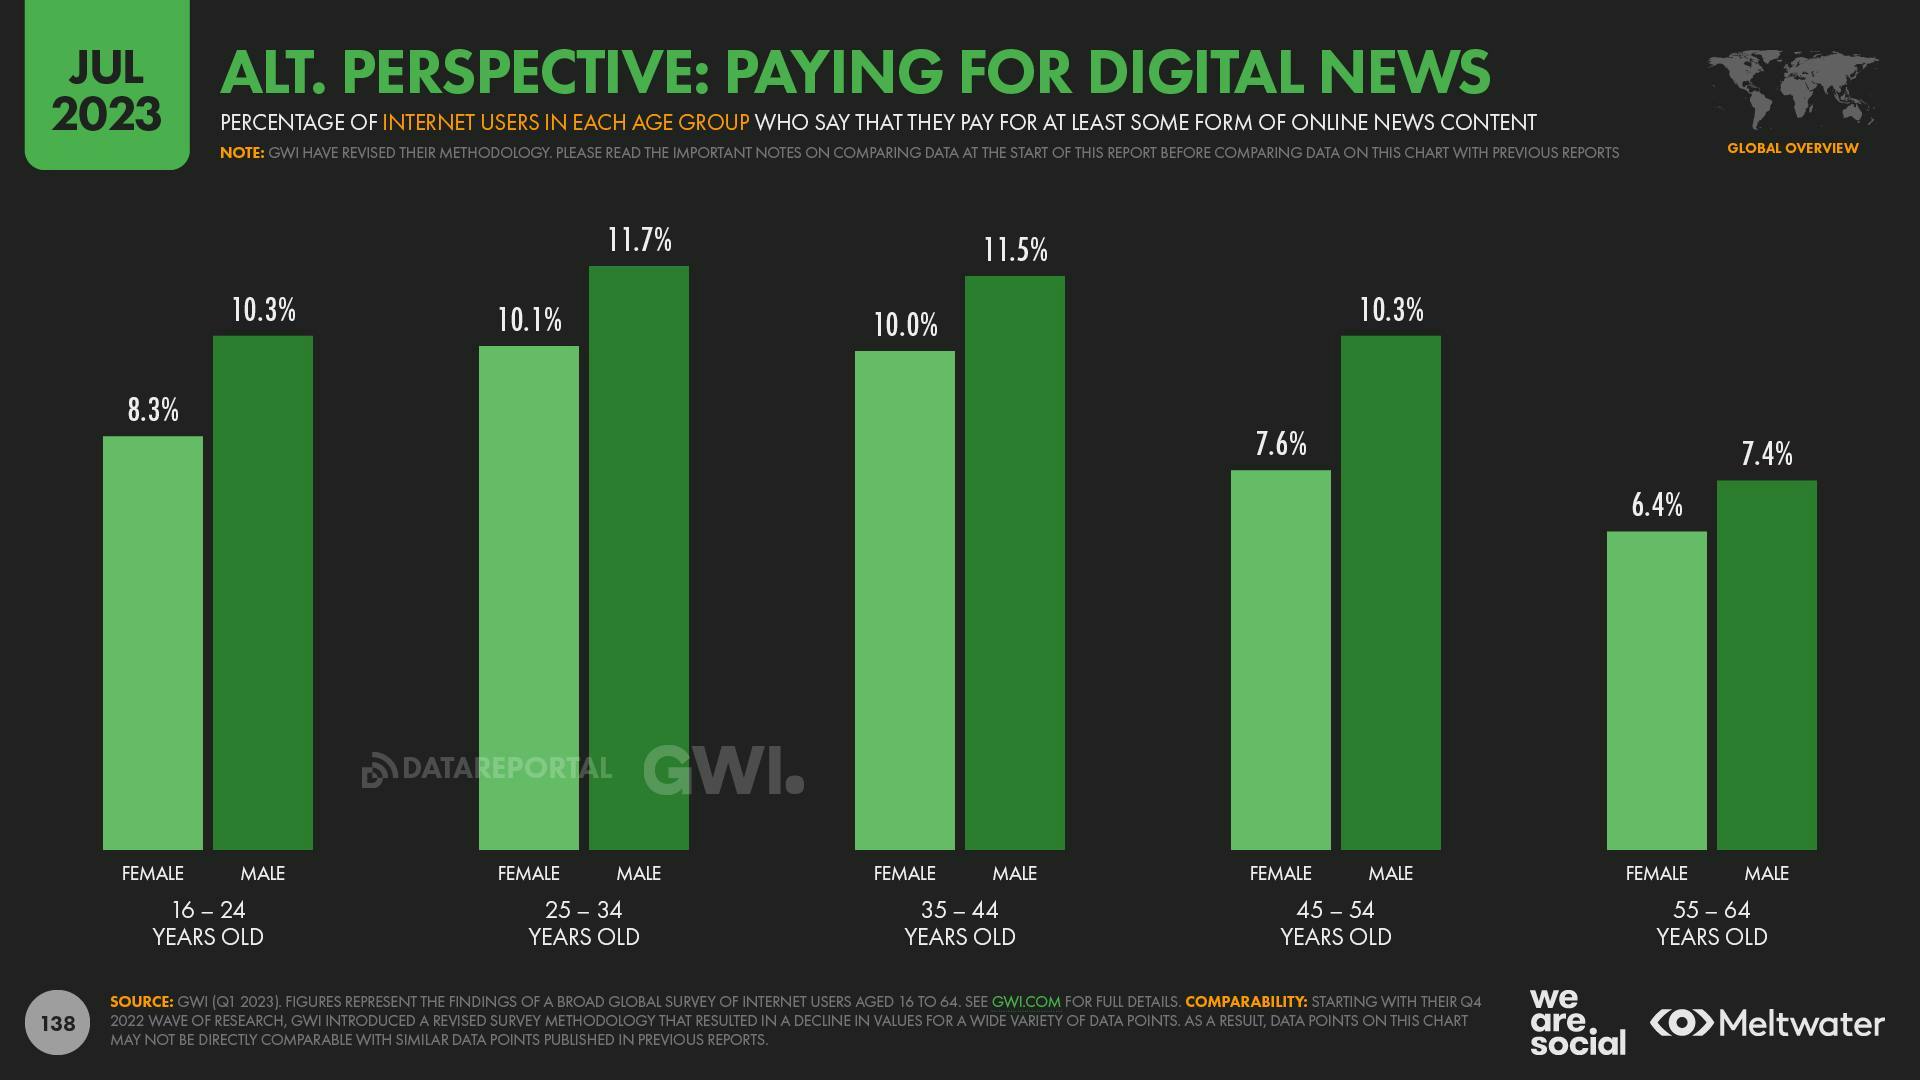 A bar chart of the percentage of men and women across age groups who pay for digital news, according to GWI survey data.